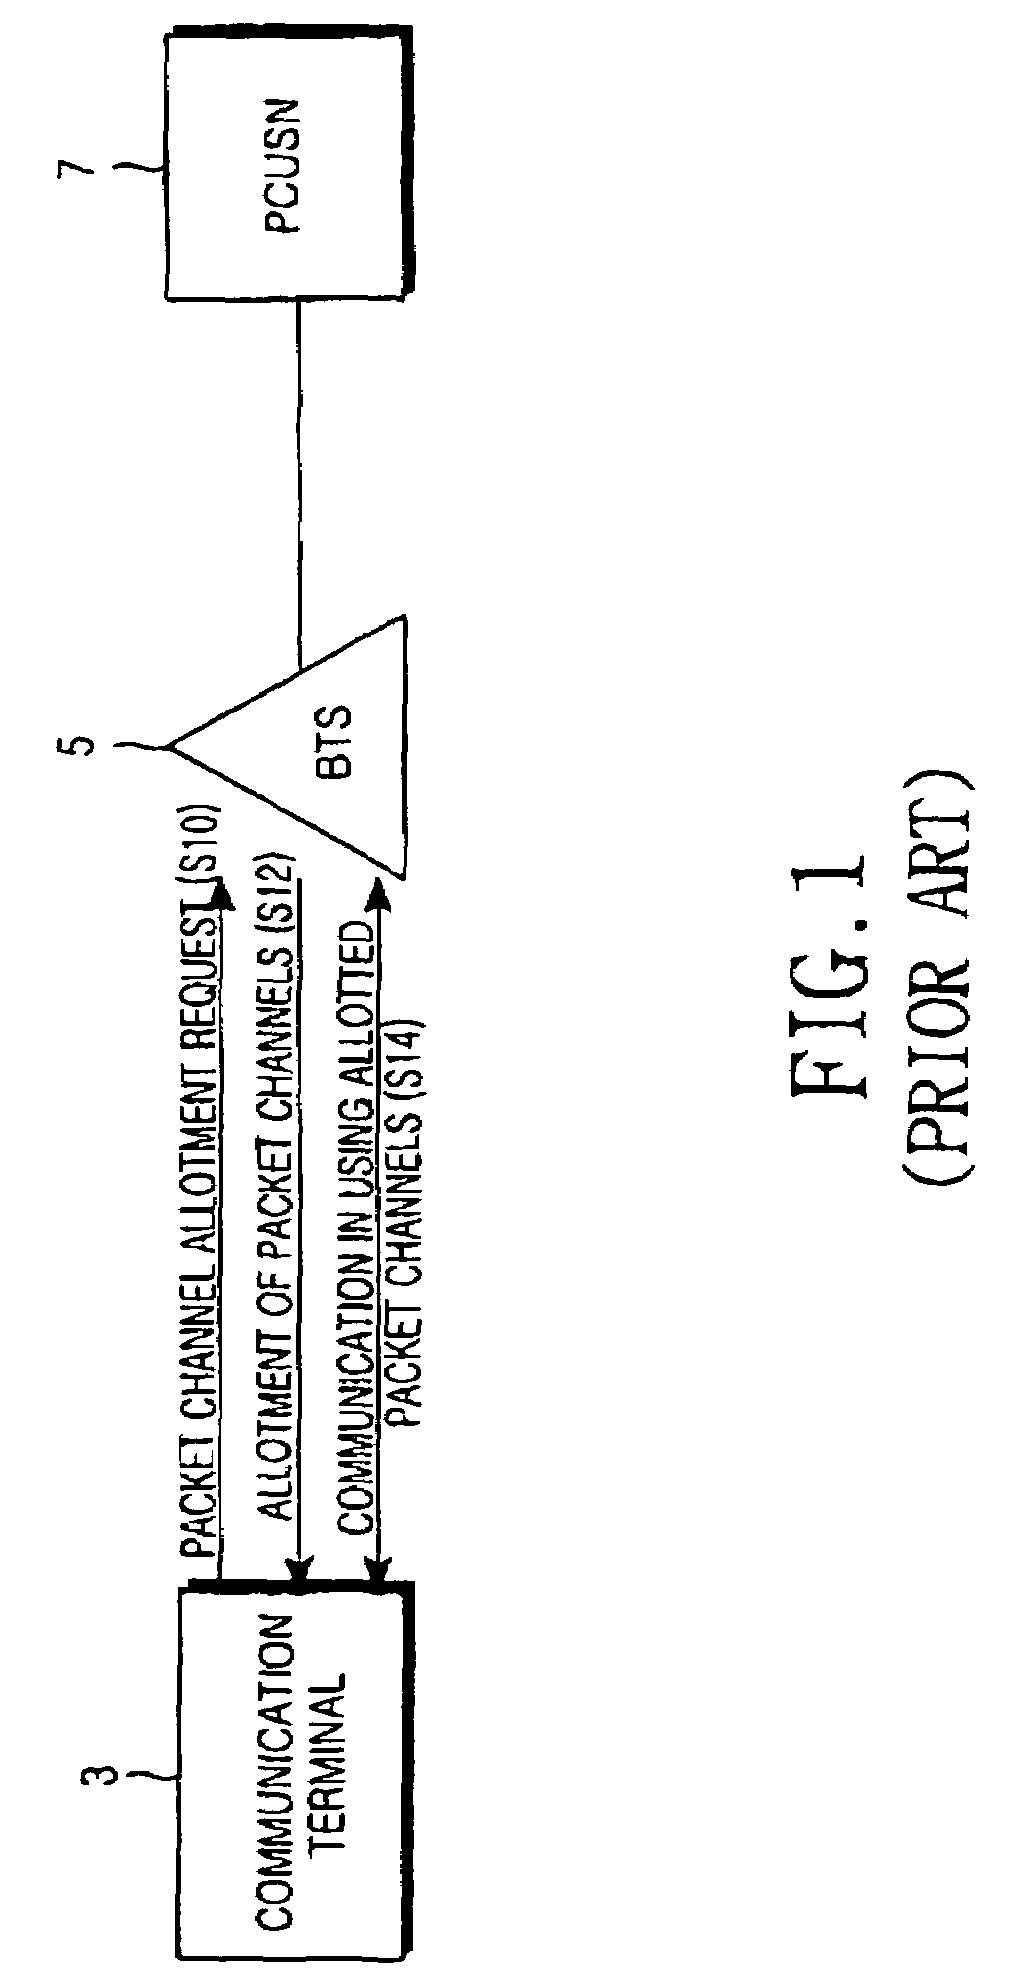 Digital signal processing apparatus of communication terminal for adaptably transmitting voice data to allotted uplink channels and voice data transmission method thereof